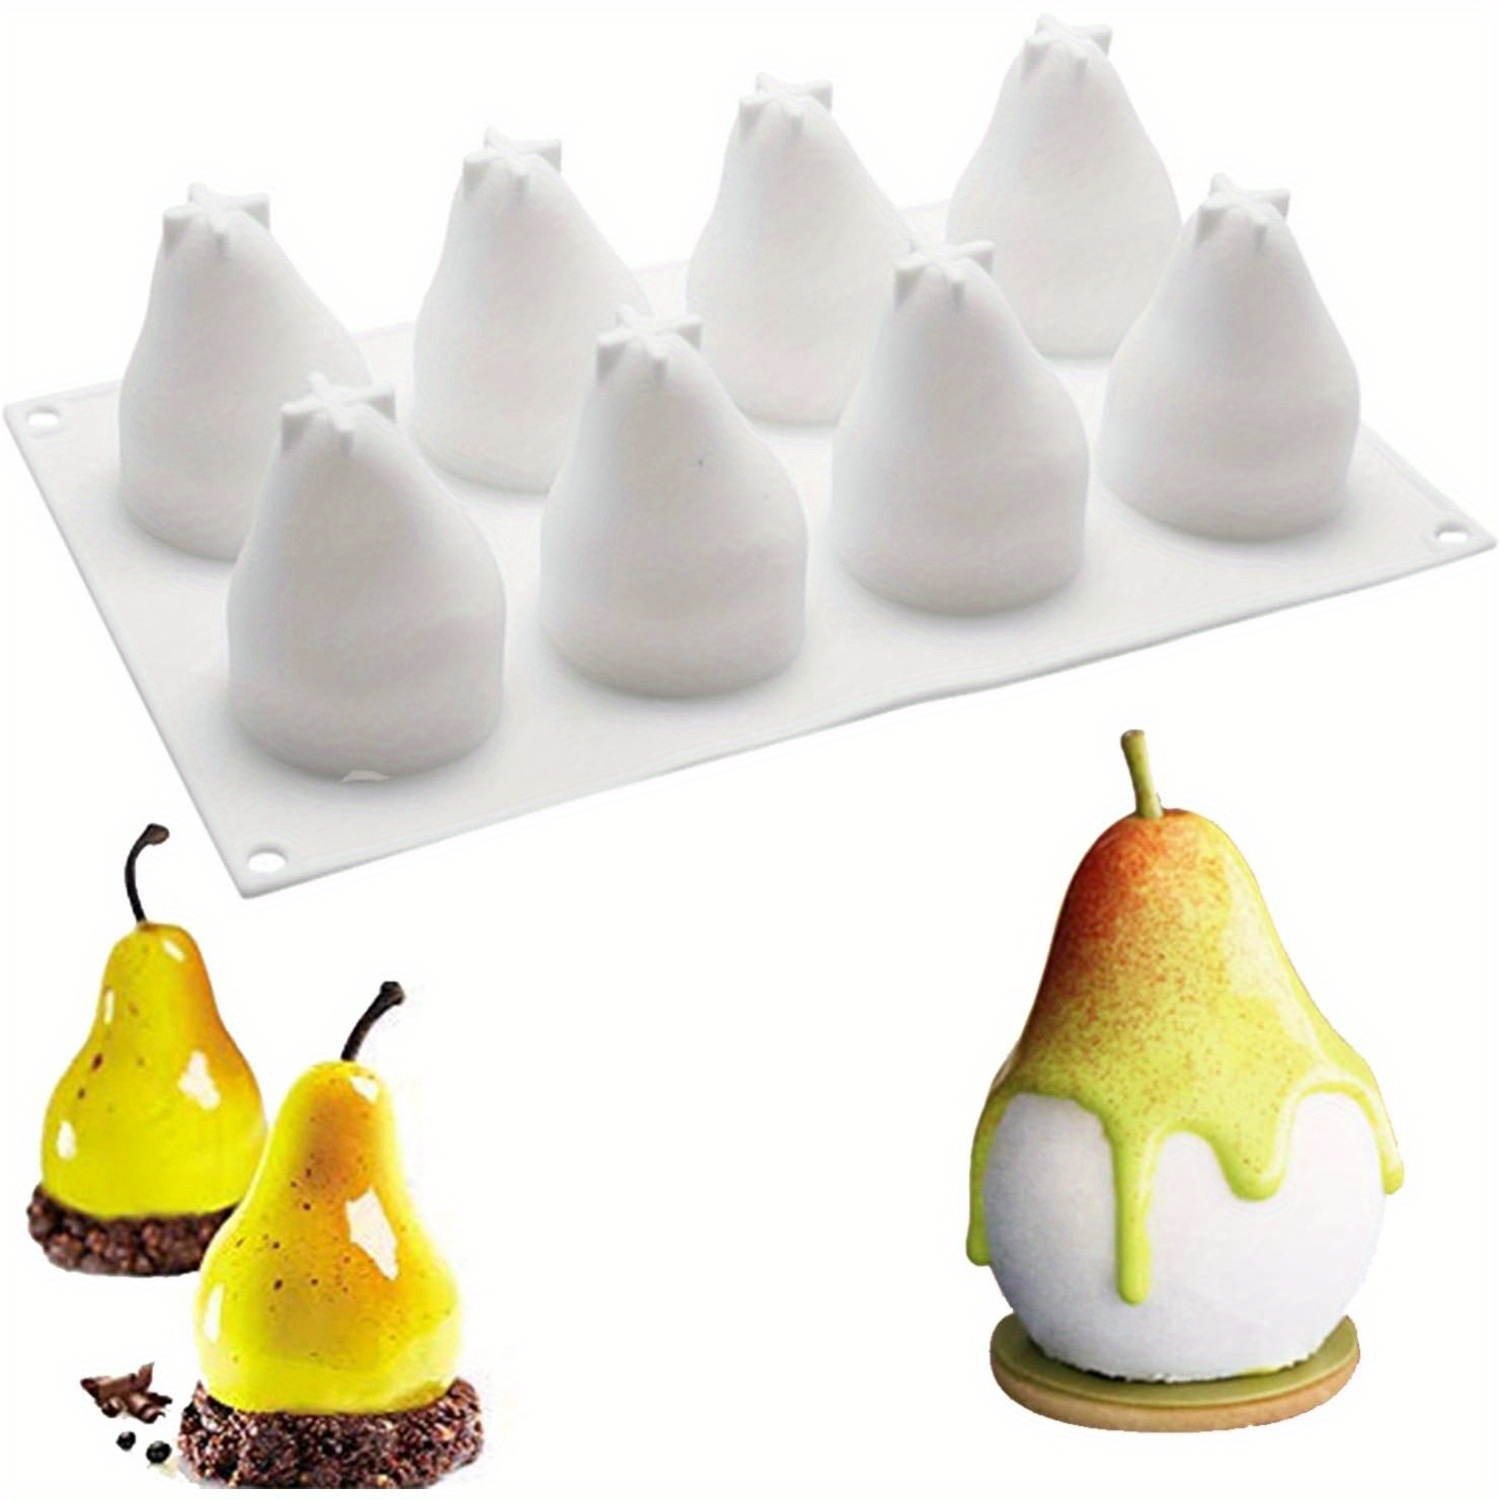 

1pc, 3d Pear Silicone Mold For Baking Mousse Cake, 3d Fruit Silicone Mold For Cakes, French Dessert Mold, Ice Cream, Cake Decorating Mold, Non-stick And Easy Release, 3d Pear Shaped (8-cavity)